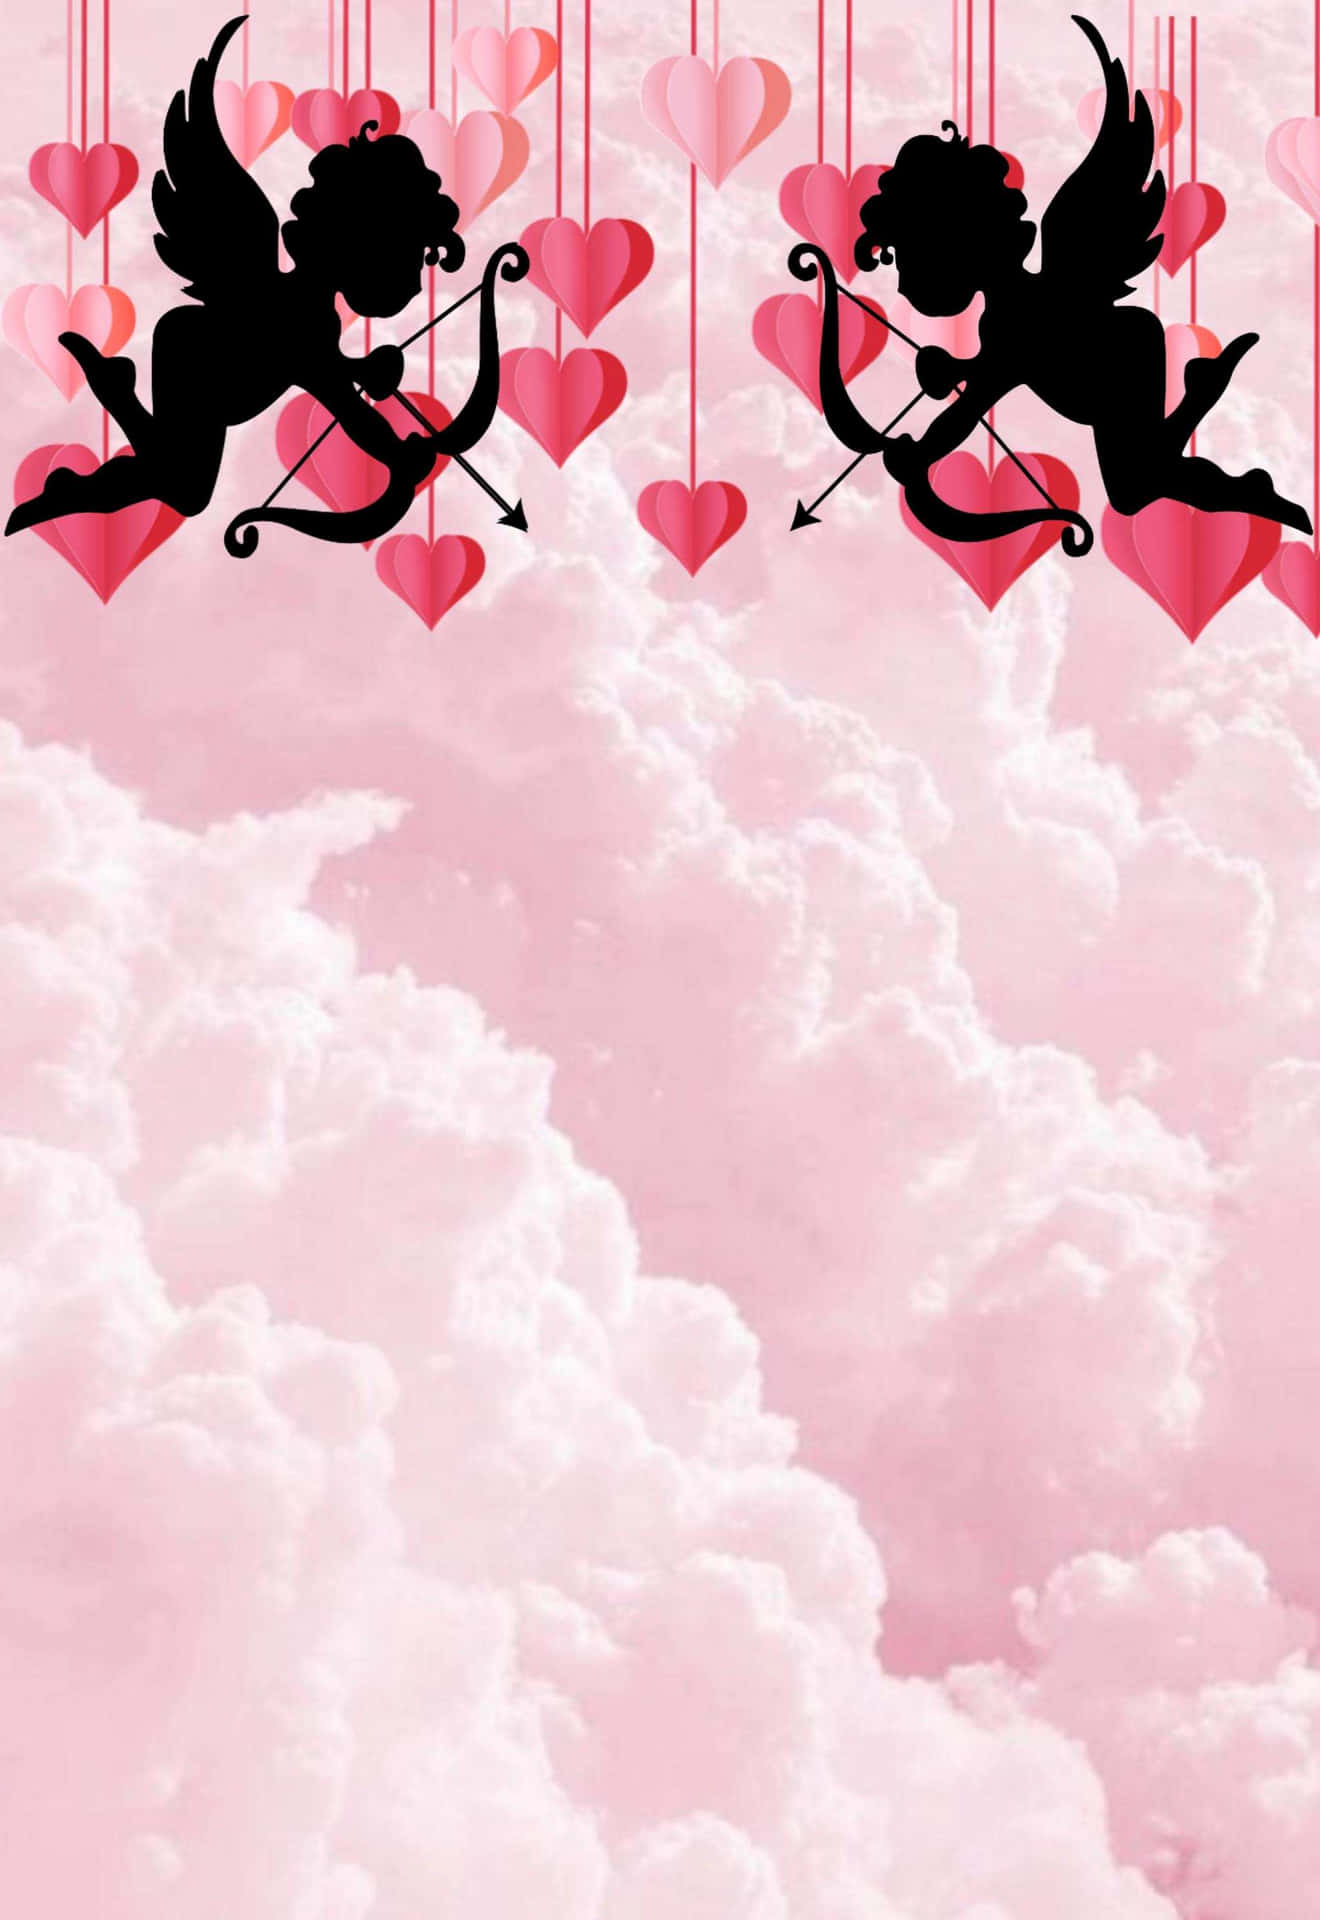 Cupid Silhouettes Clouds Hearts Background